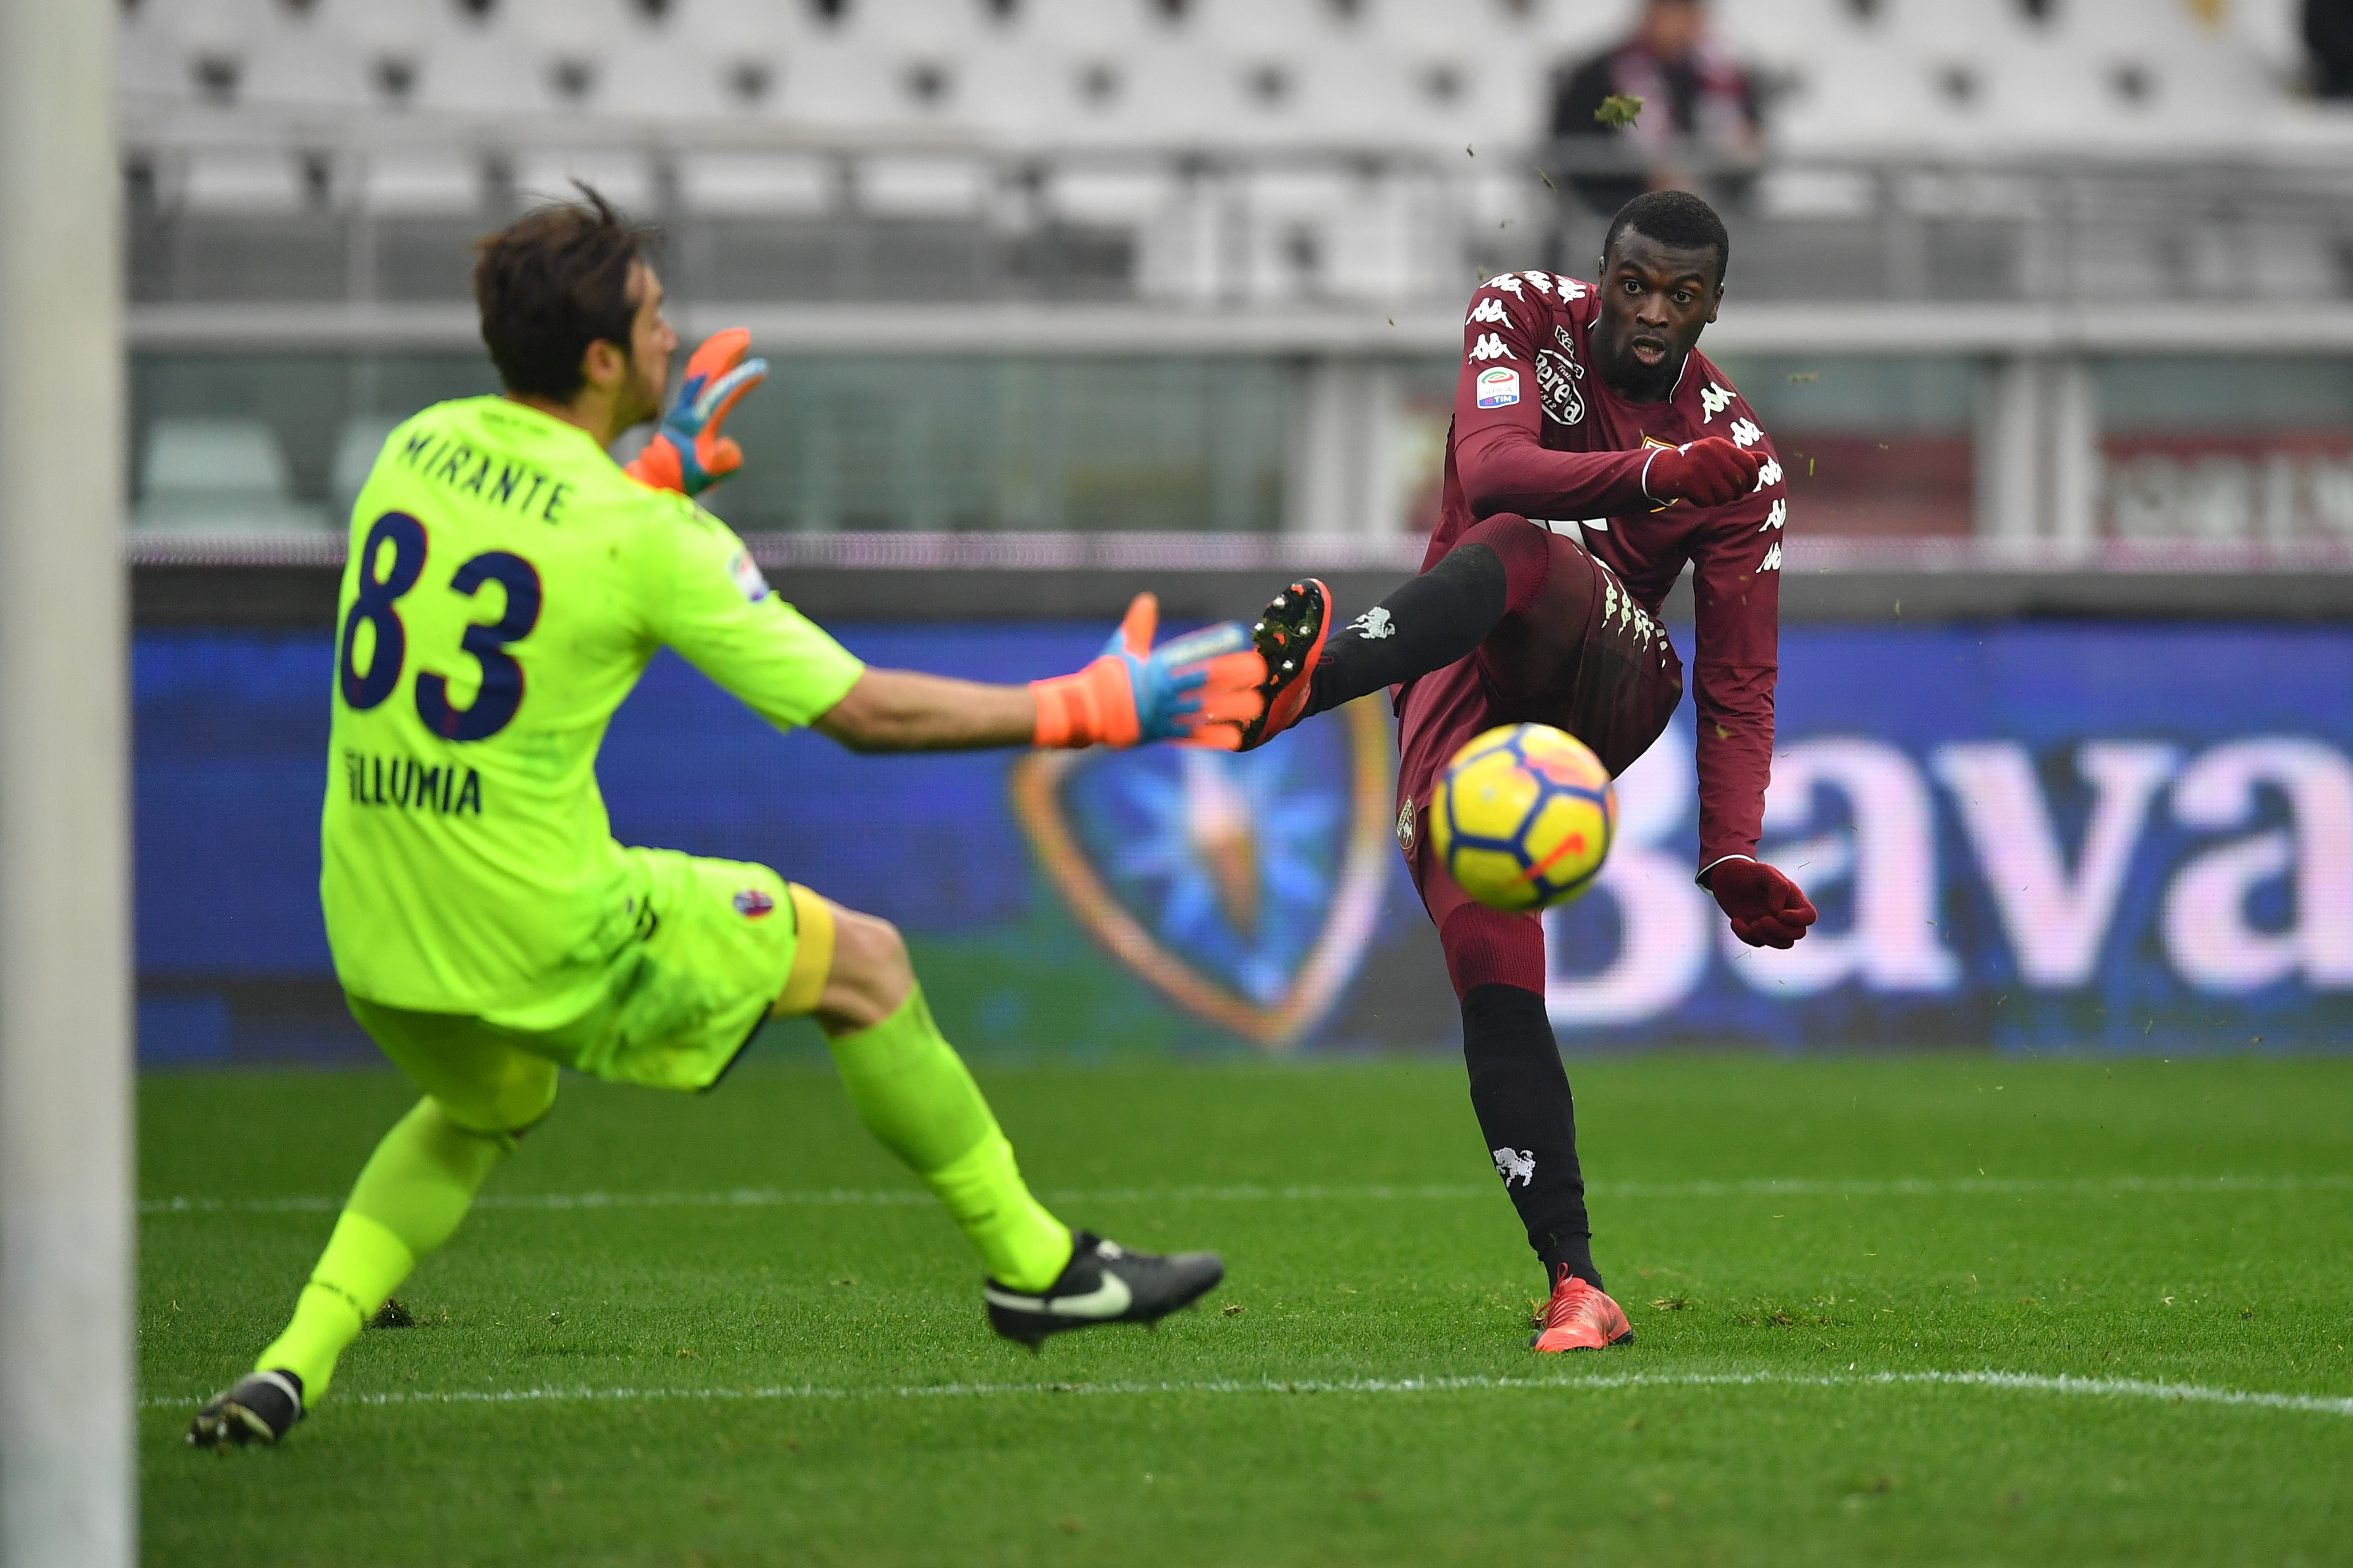 TURIN, ITALY - JANUARY 06:  M Baye Niang of Torino FC scores a goal during the serie A match between Torino FC and Bologna FC at Stadio Olimpico di Torino on January 6, 2018 in Turin, Italy.  (Photo by Valerio Pennicino/Getty Images)